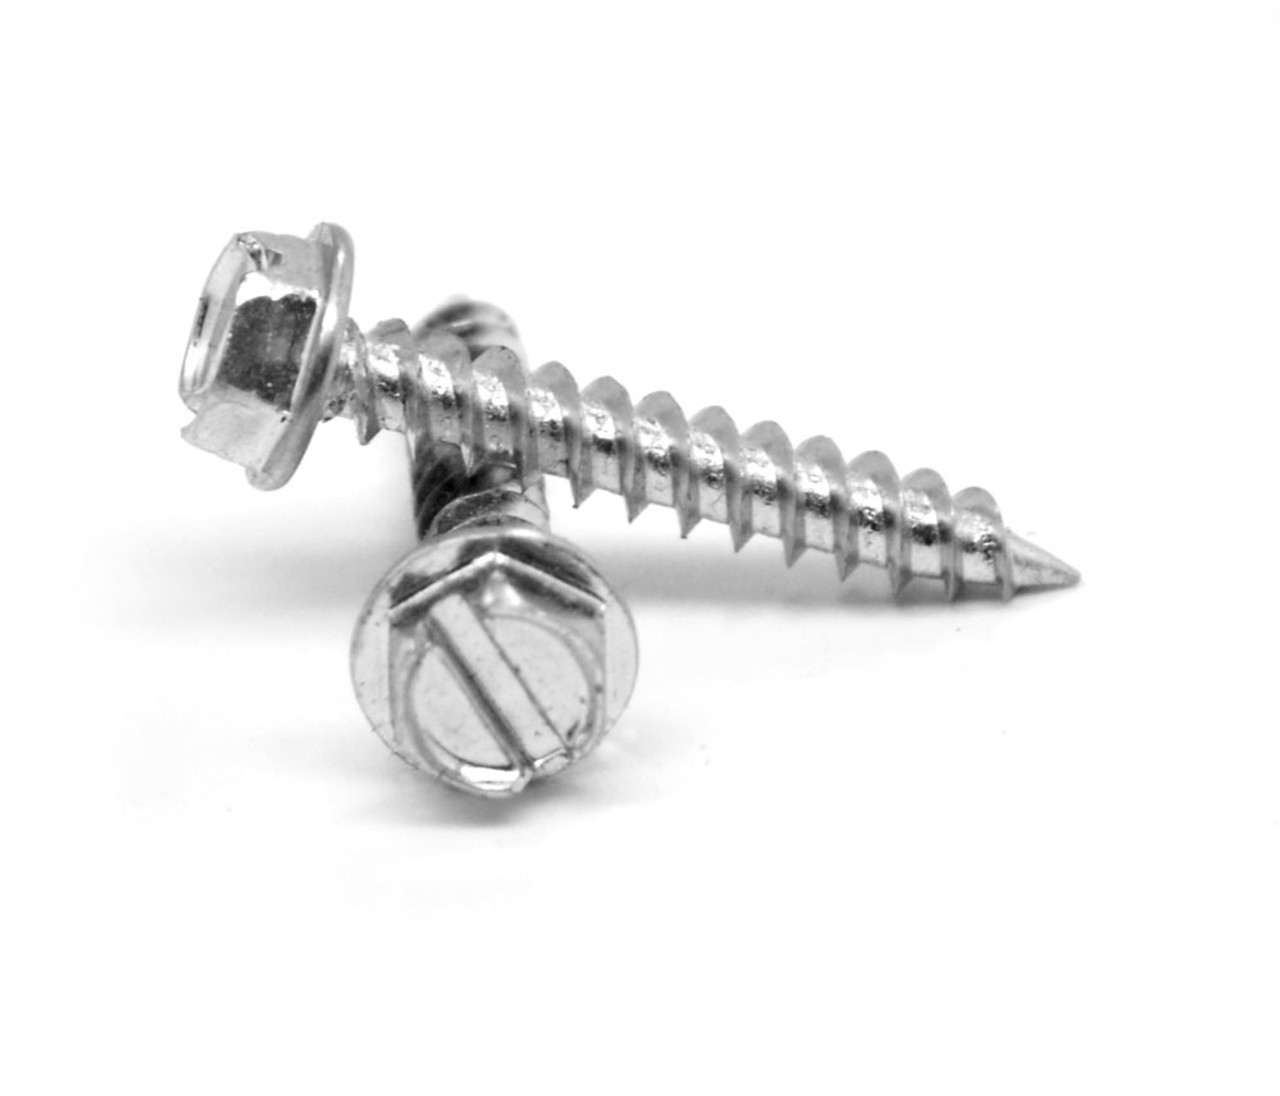 #10-12 x 1 1/4" Sheet Metal Screw Slotted Hex Washer Head Type A Low Carbon Steel Zinc Plated